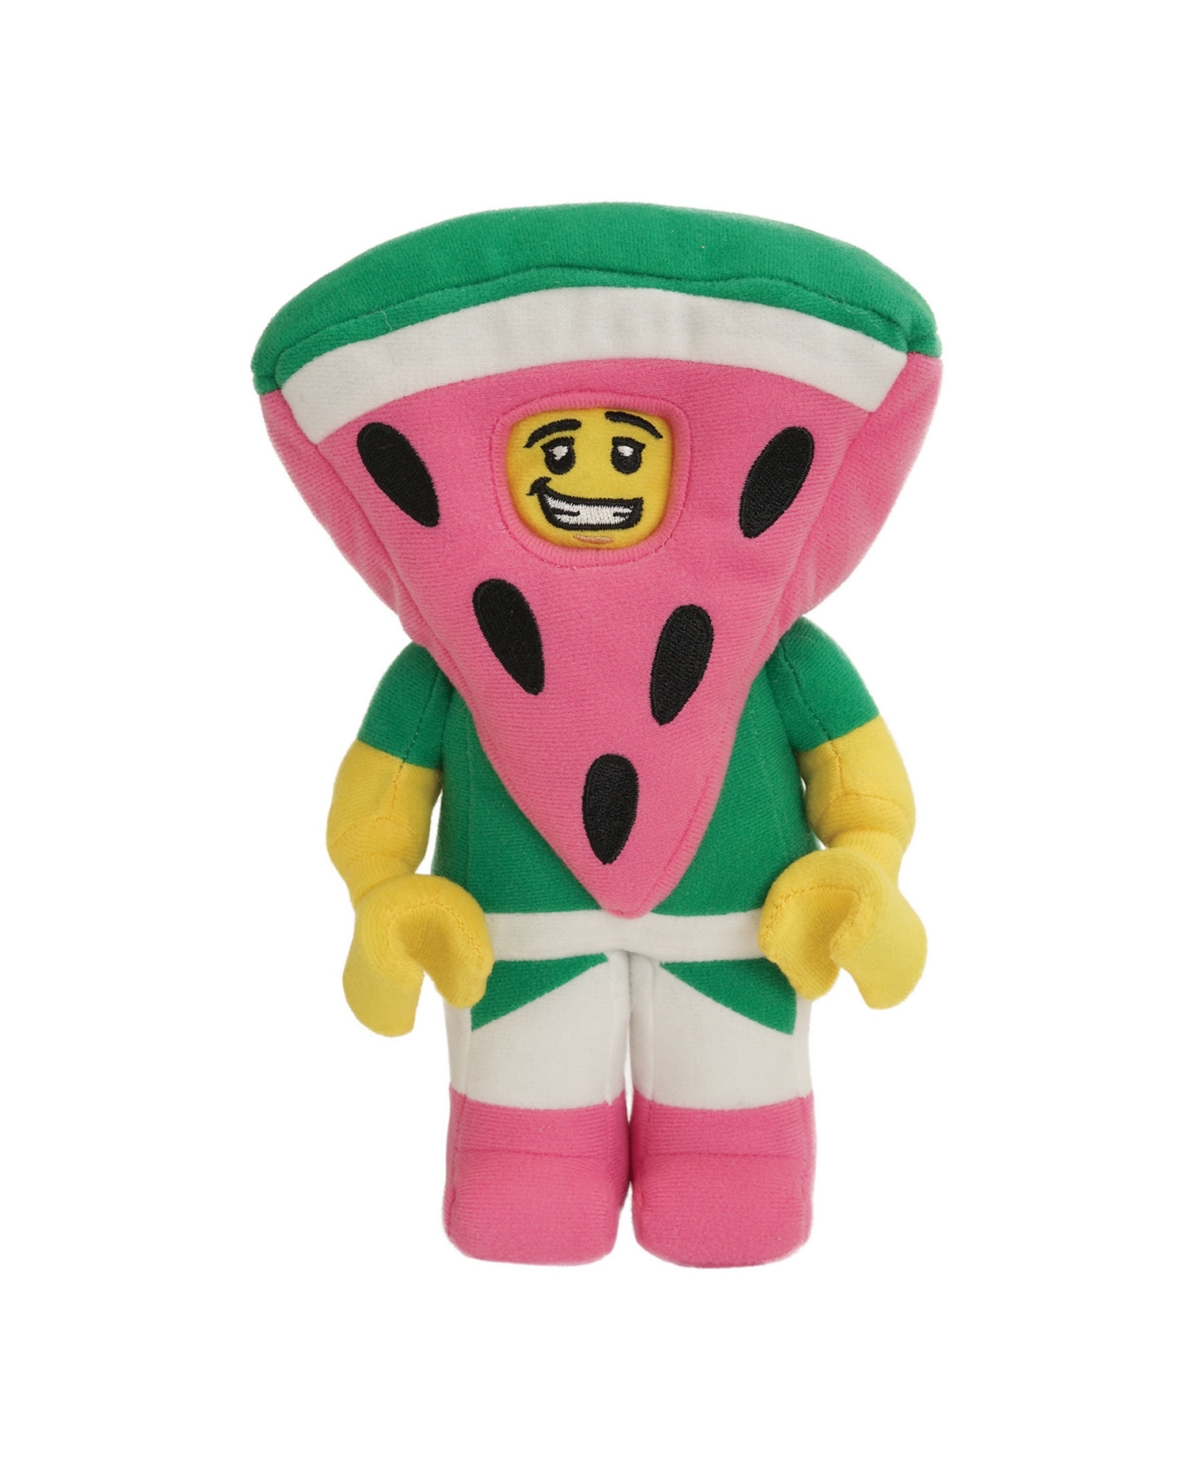 Manhattan Toy Company Kids' Lego Minifigure Watermelon Guy 9.5" Plush Character In Multicolor